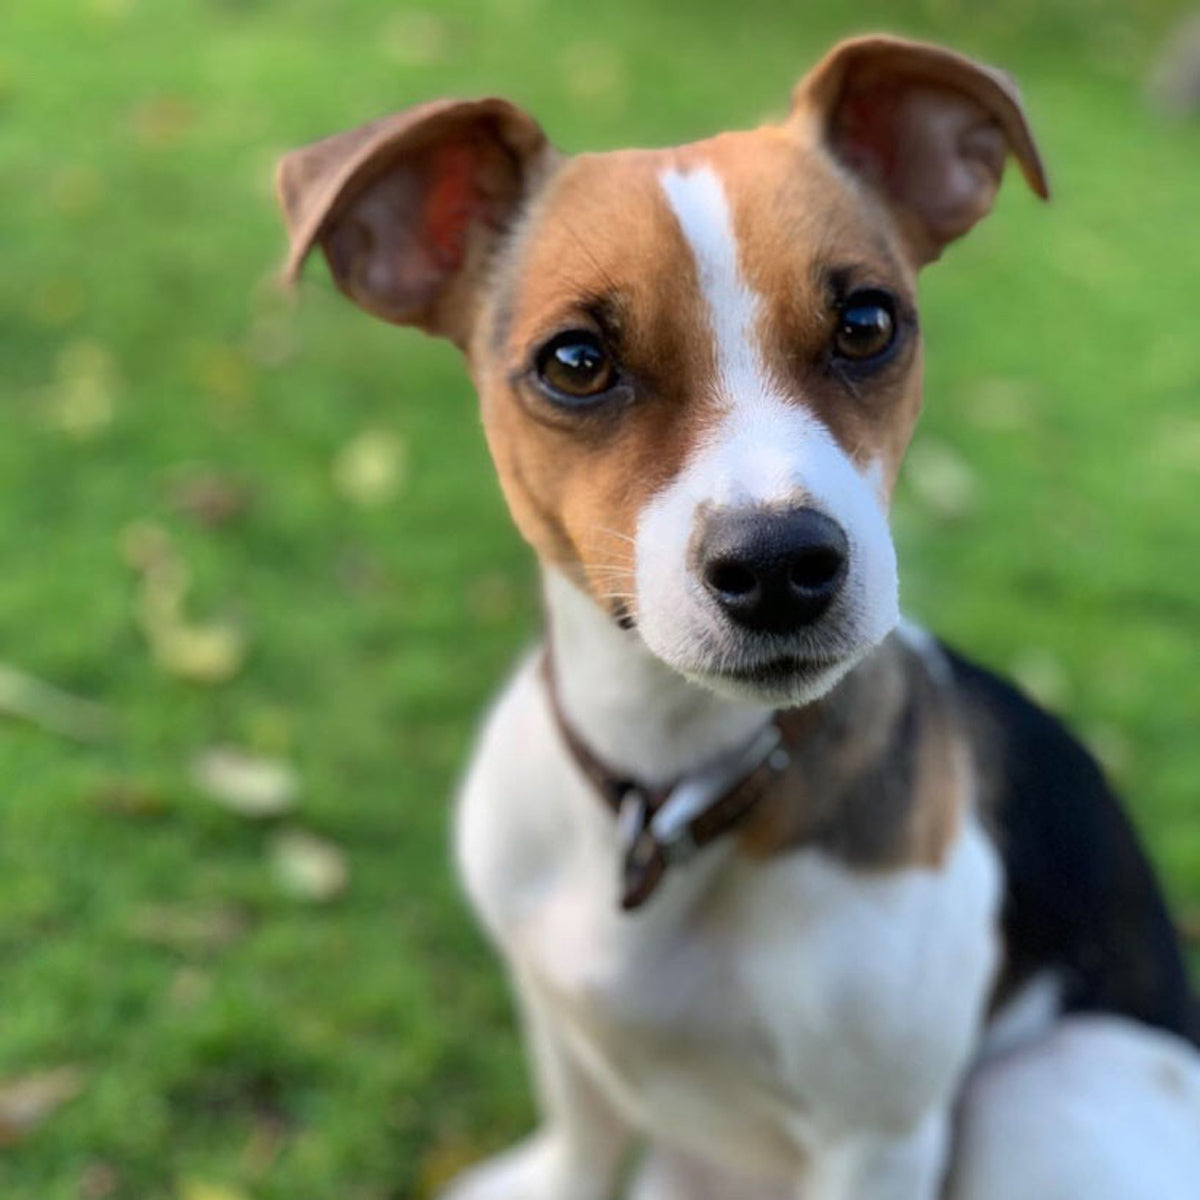 betty is a jack russell terrier, she is t forrests taste tester. She tastes all of our dog treats before the head to the quality control officer